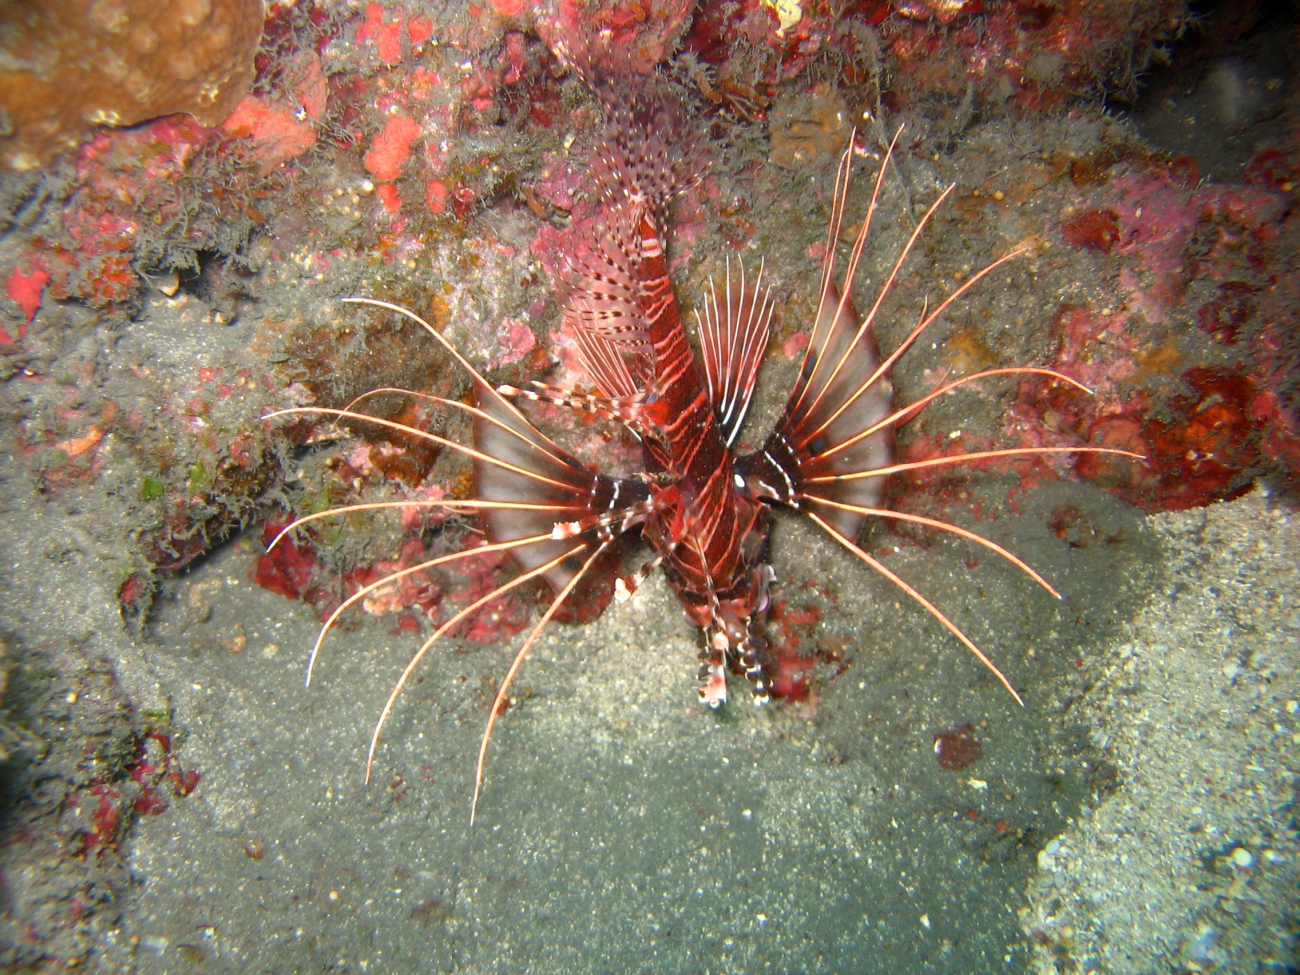 Appears to be spotfin lionfish (Pterois antennata)